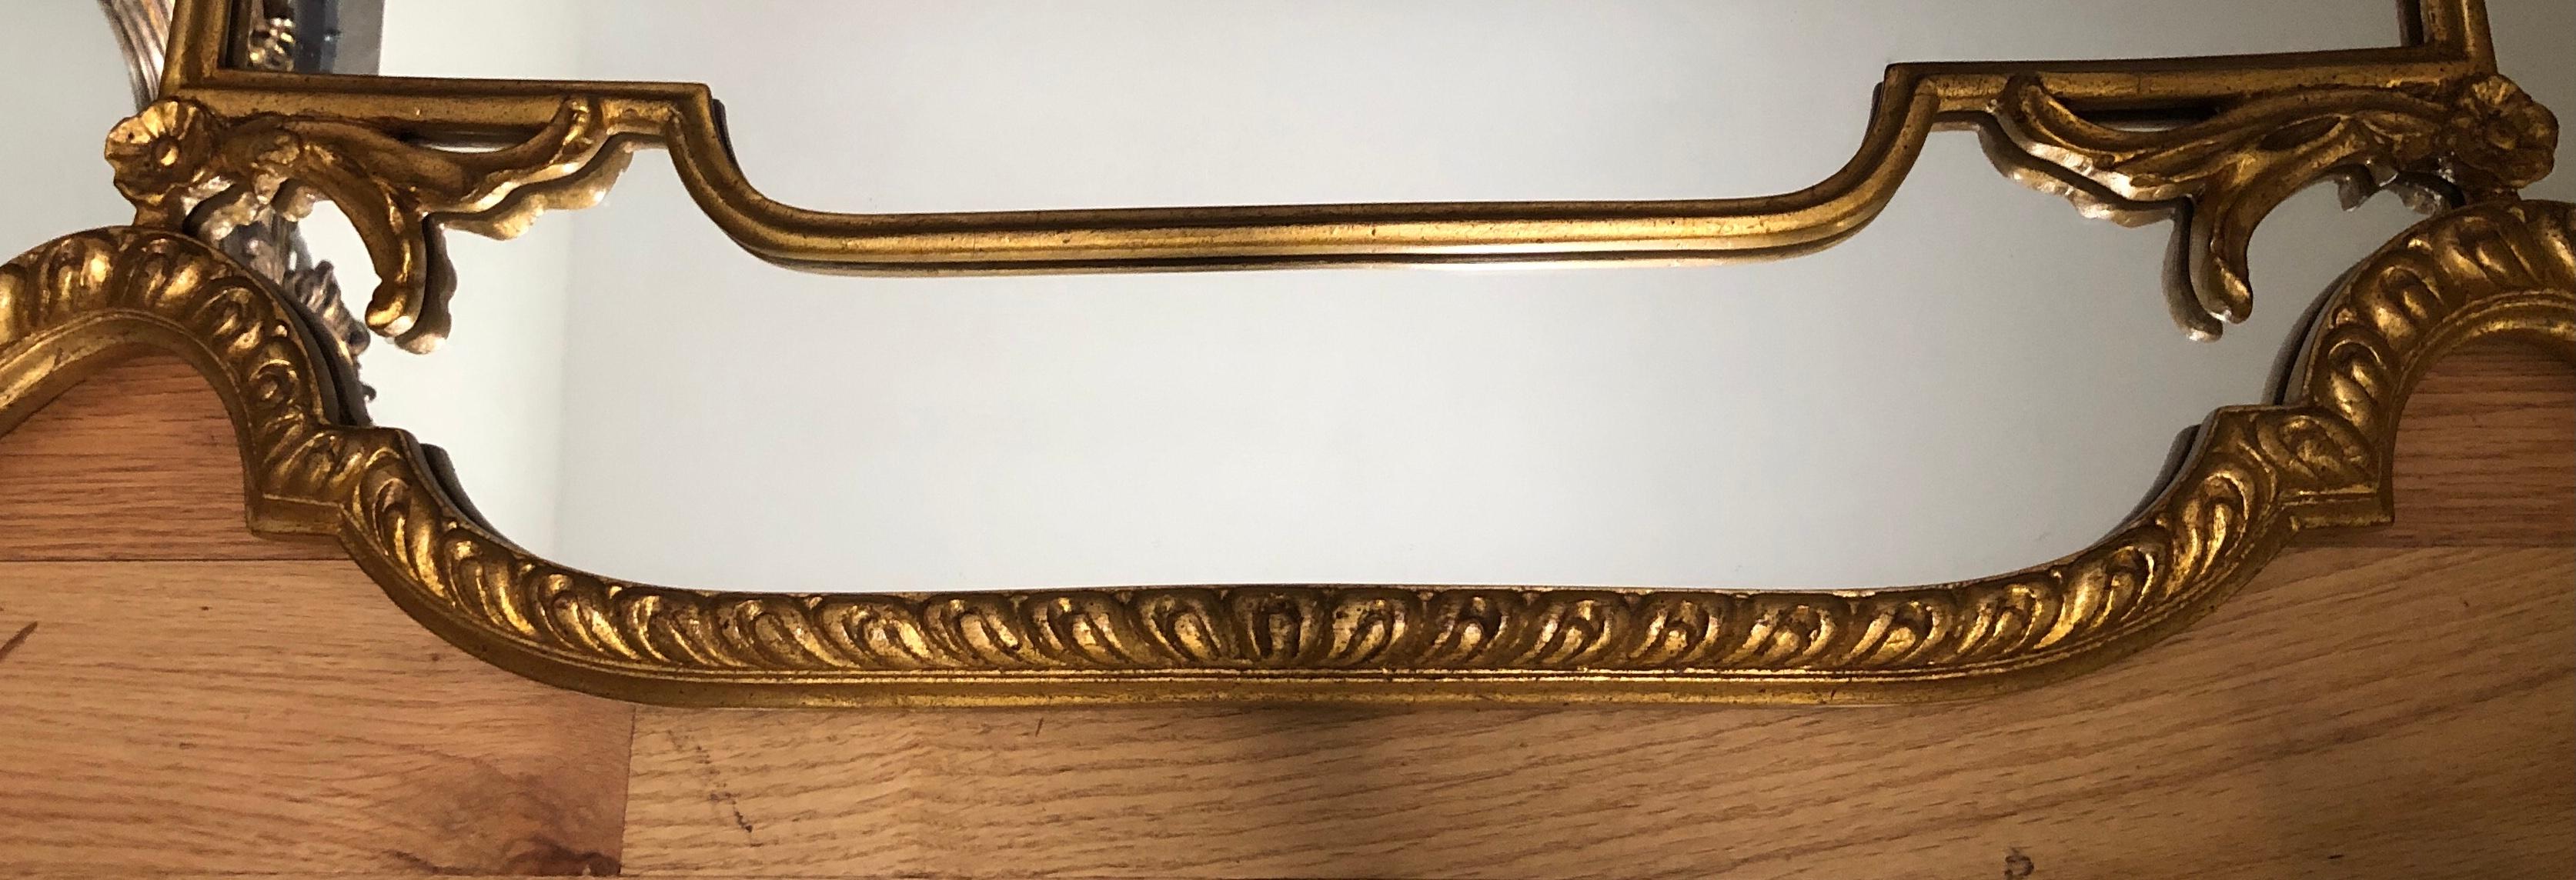 Carved and Gilt Regency Mirror For Sale 2